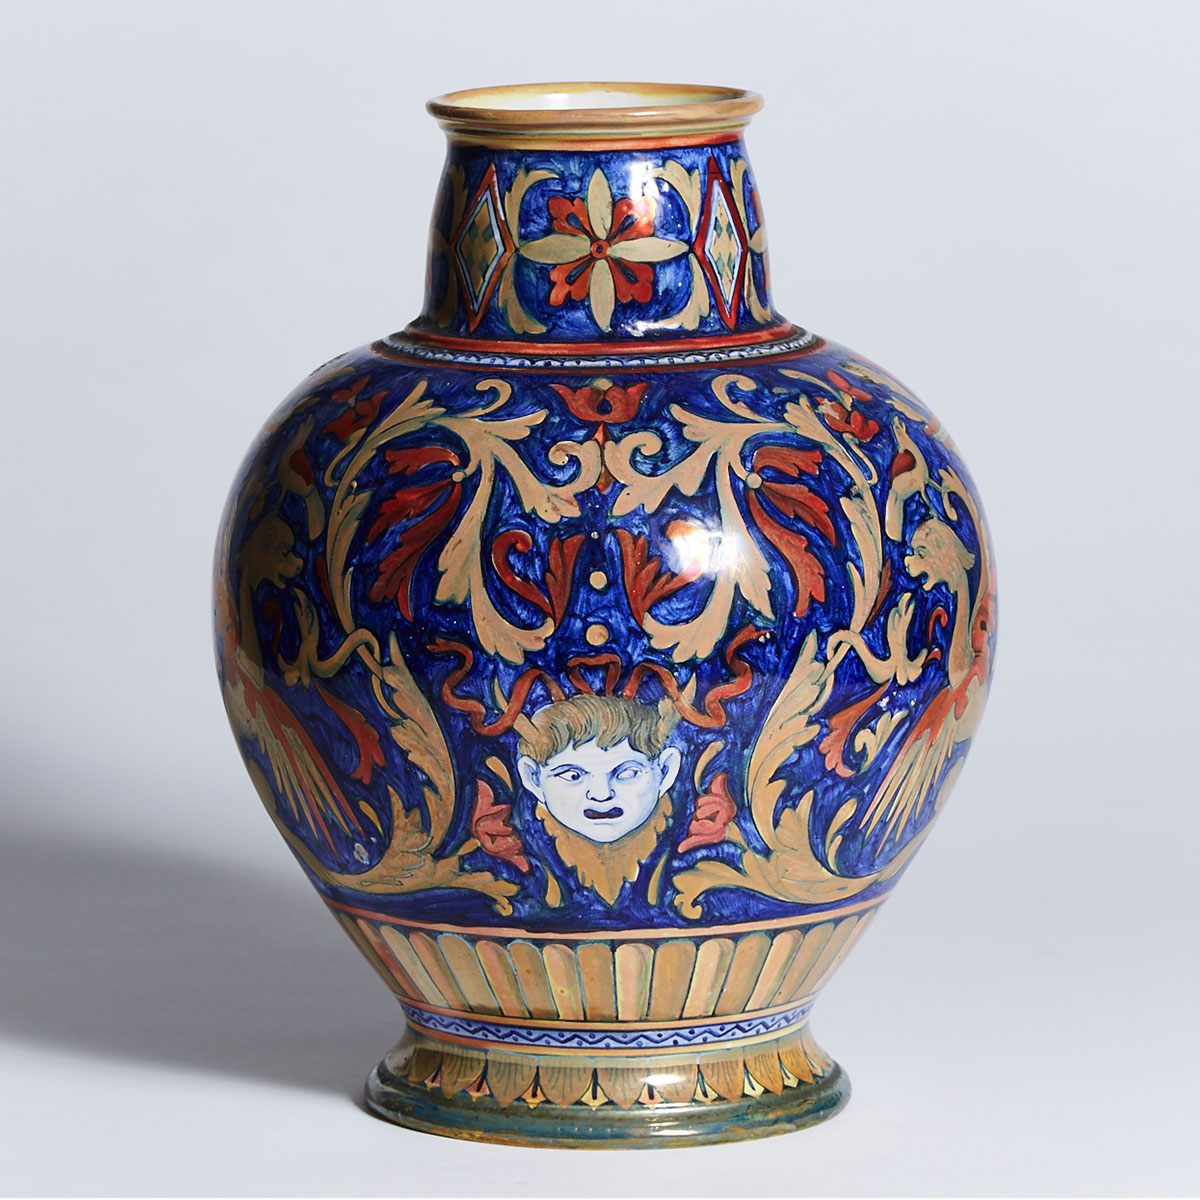 Paolo Rubboli Large Lustre Decorated Faience Vase, early 20th century